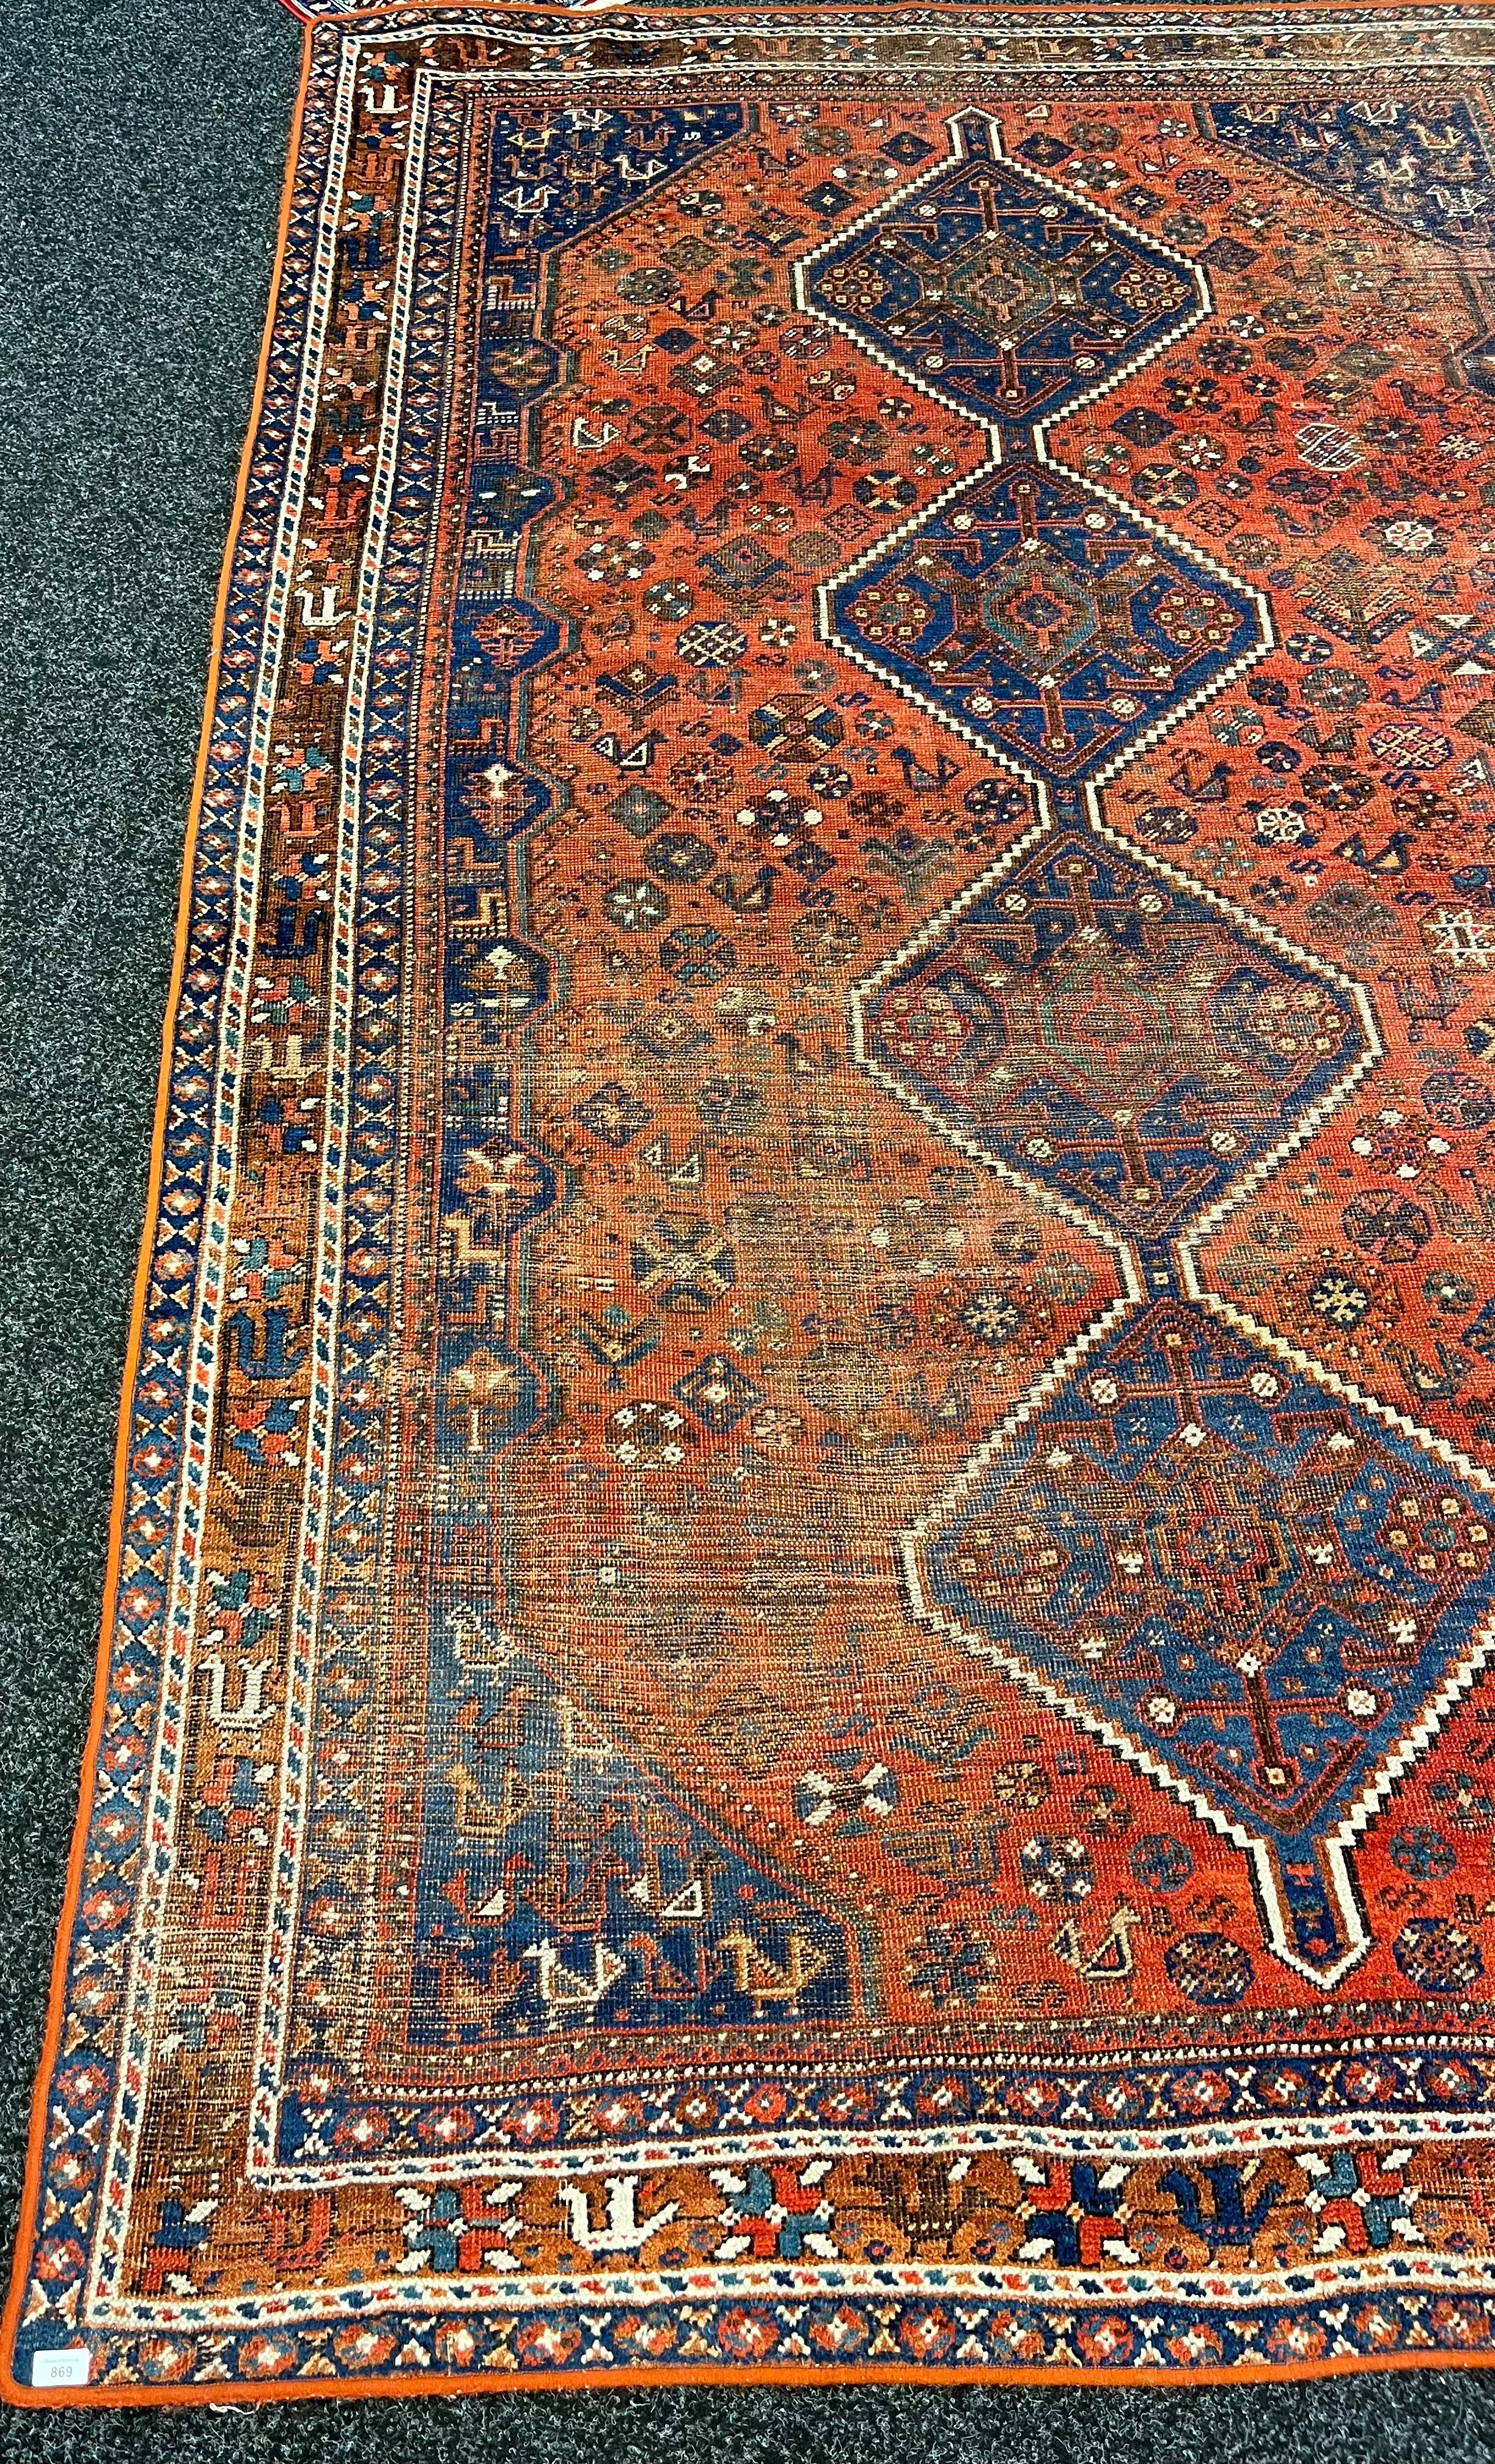 Provinz Gaschgai Iranian rug with certificate of authenticity [200x300cm] - Image 2 of 10